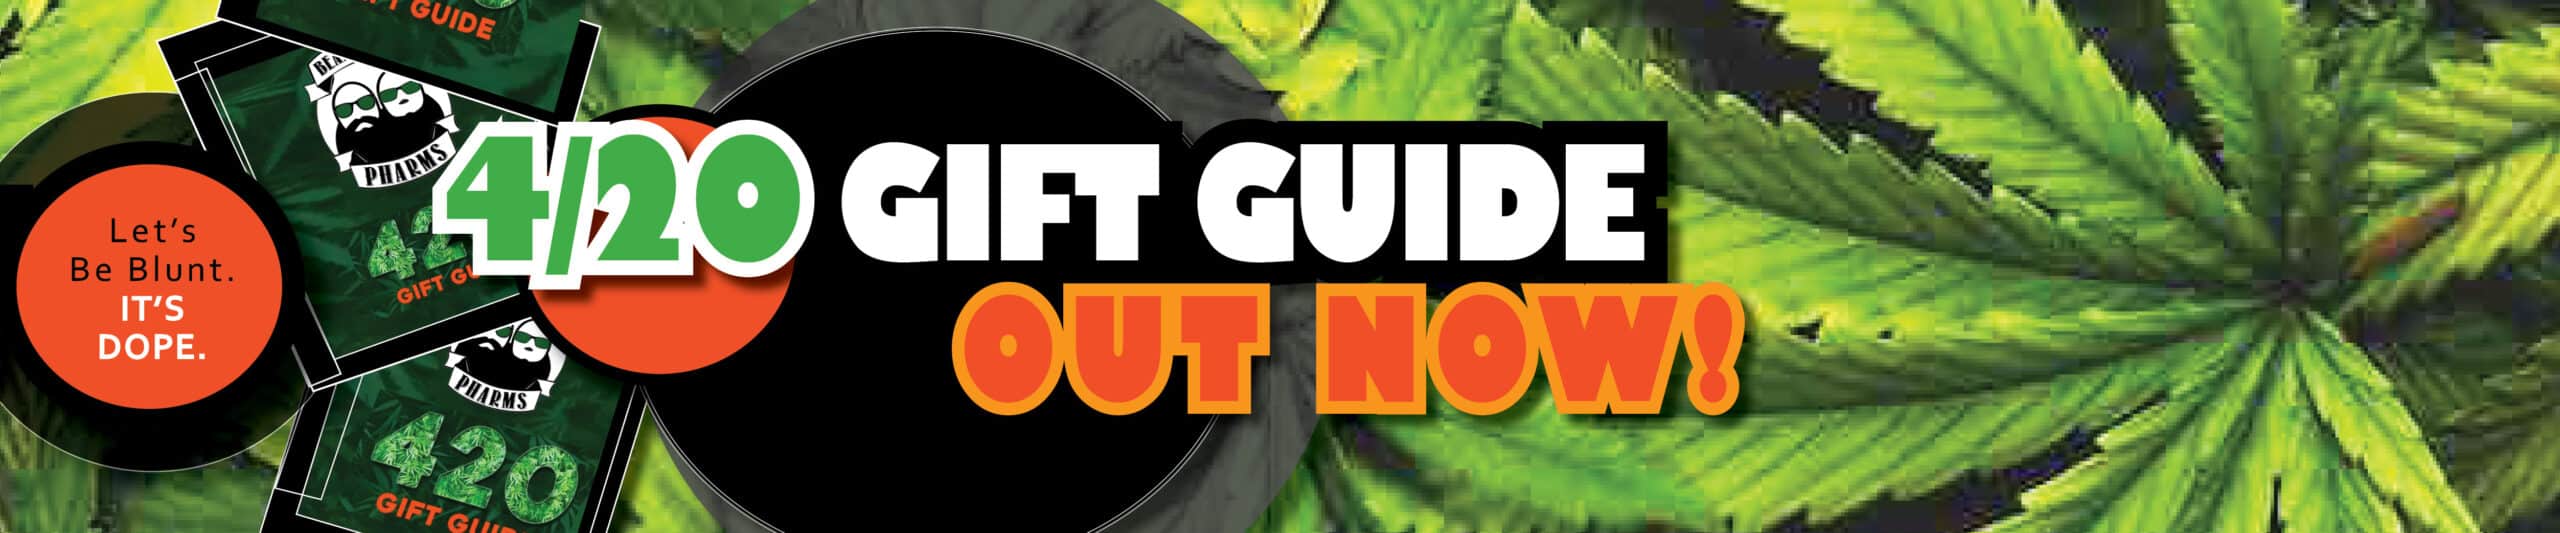 420 GUIDE EXAMPLE 3 BANNER AD EDITED AND RESIZED